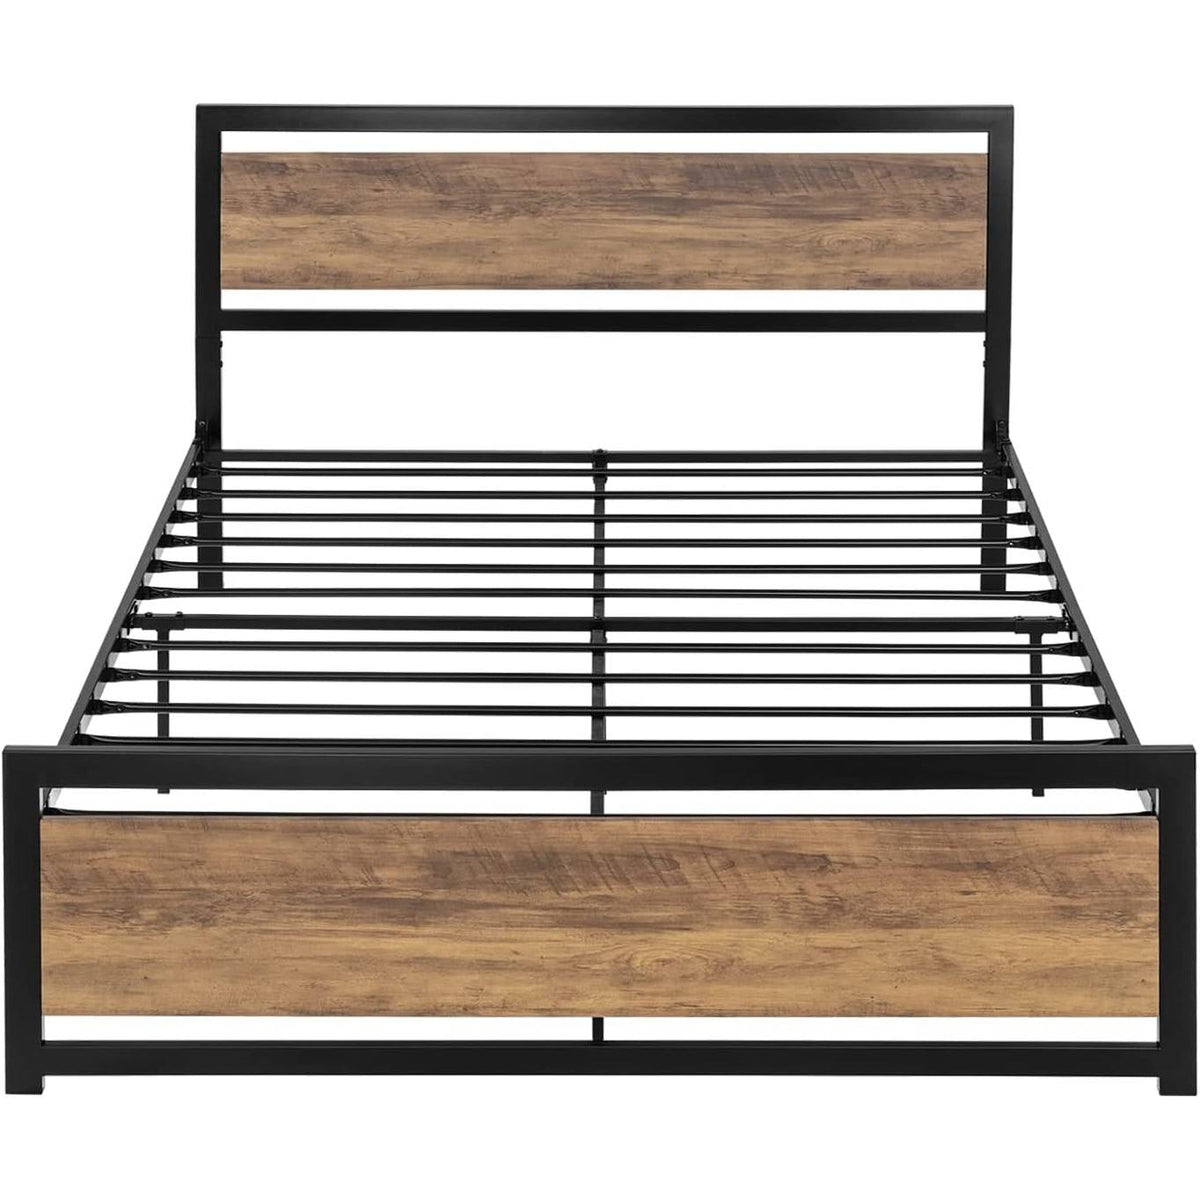 Full Metal Platform Bed Frame with Brown Wood Panel Headboard and Footboard